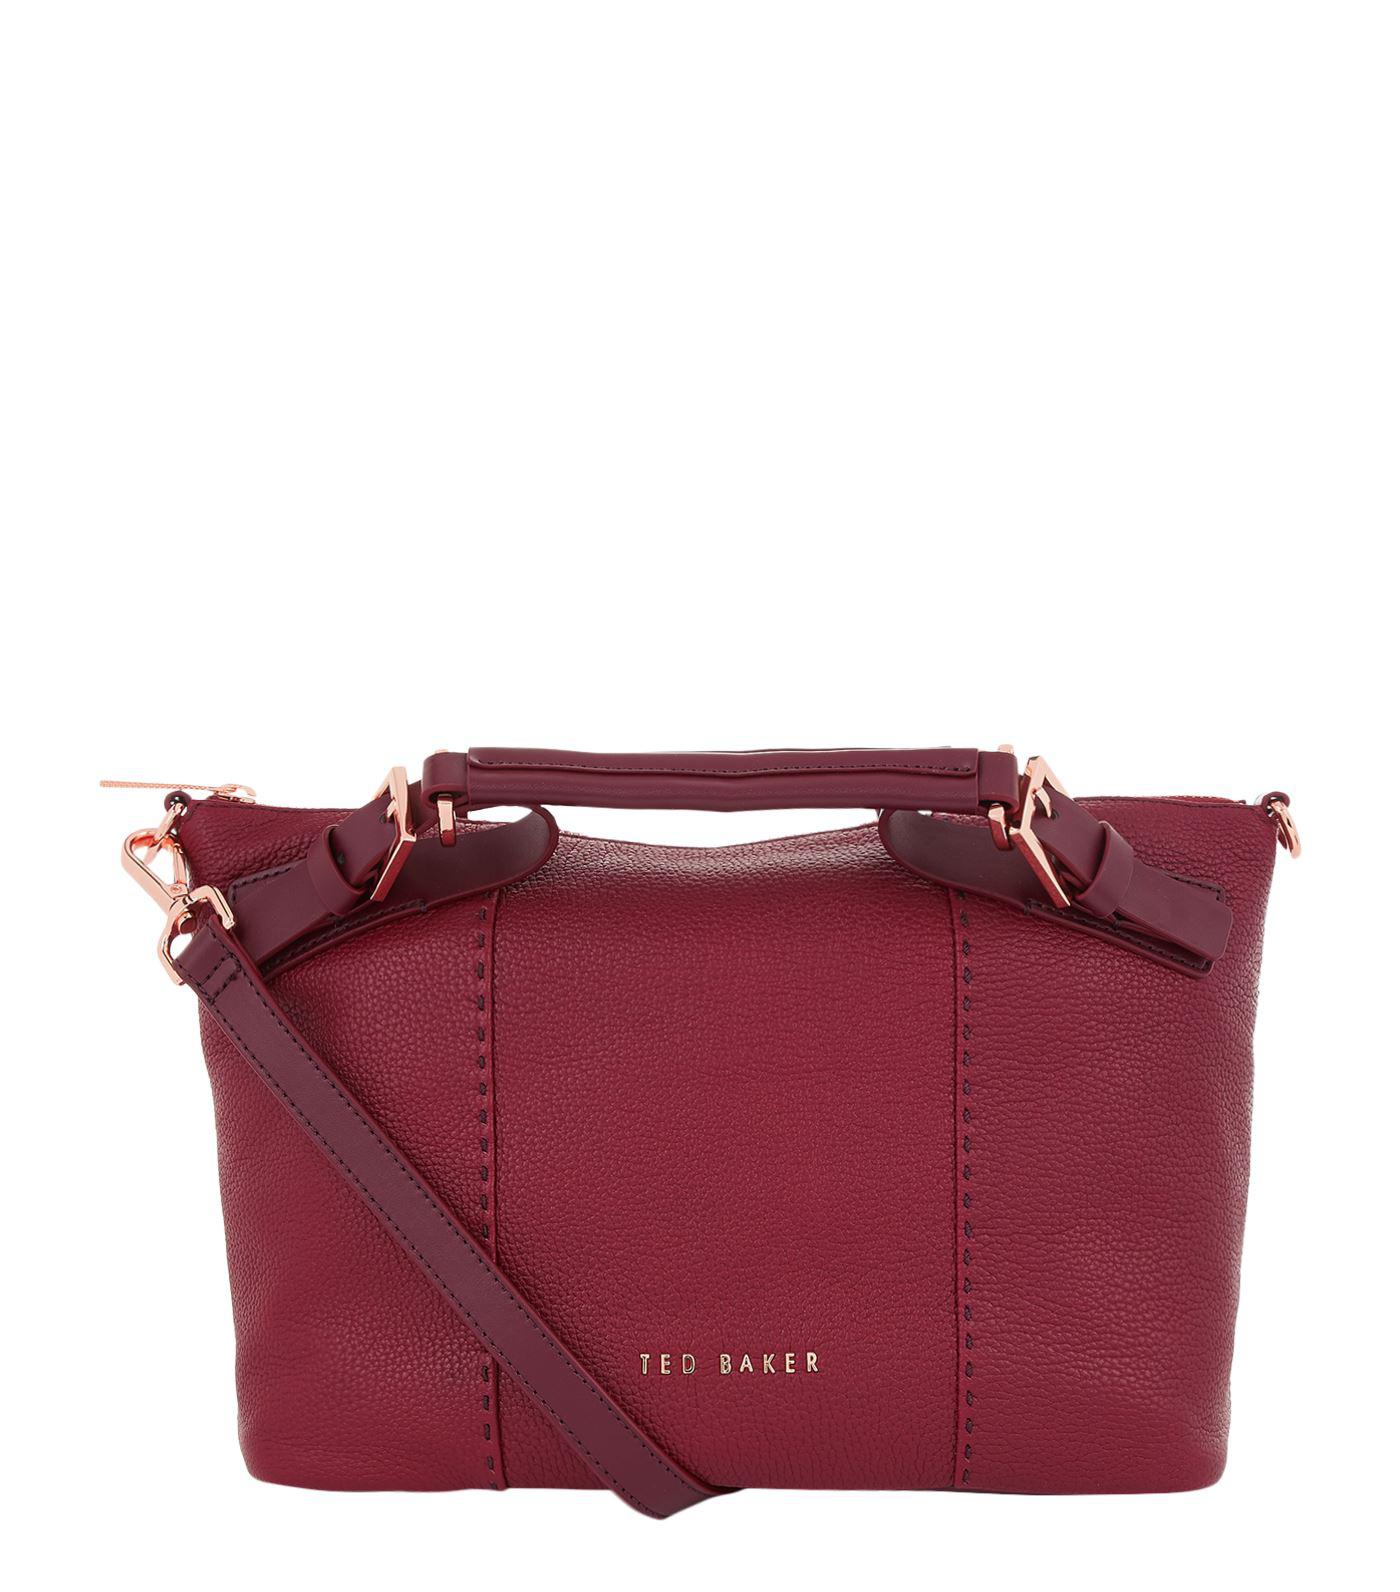 Ted Baker Leather Salbett Small Tote Bag in Red - Lyst